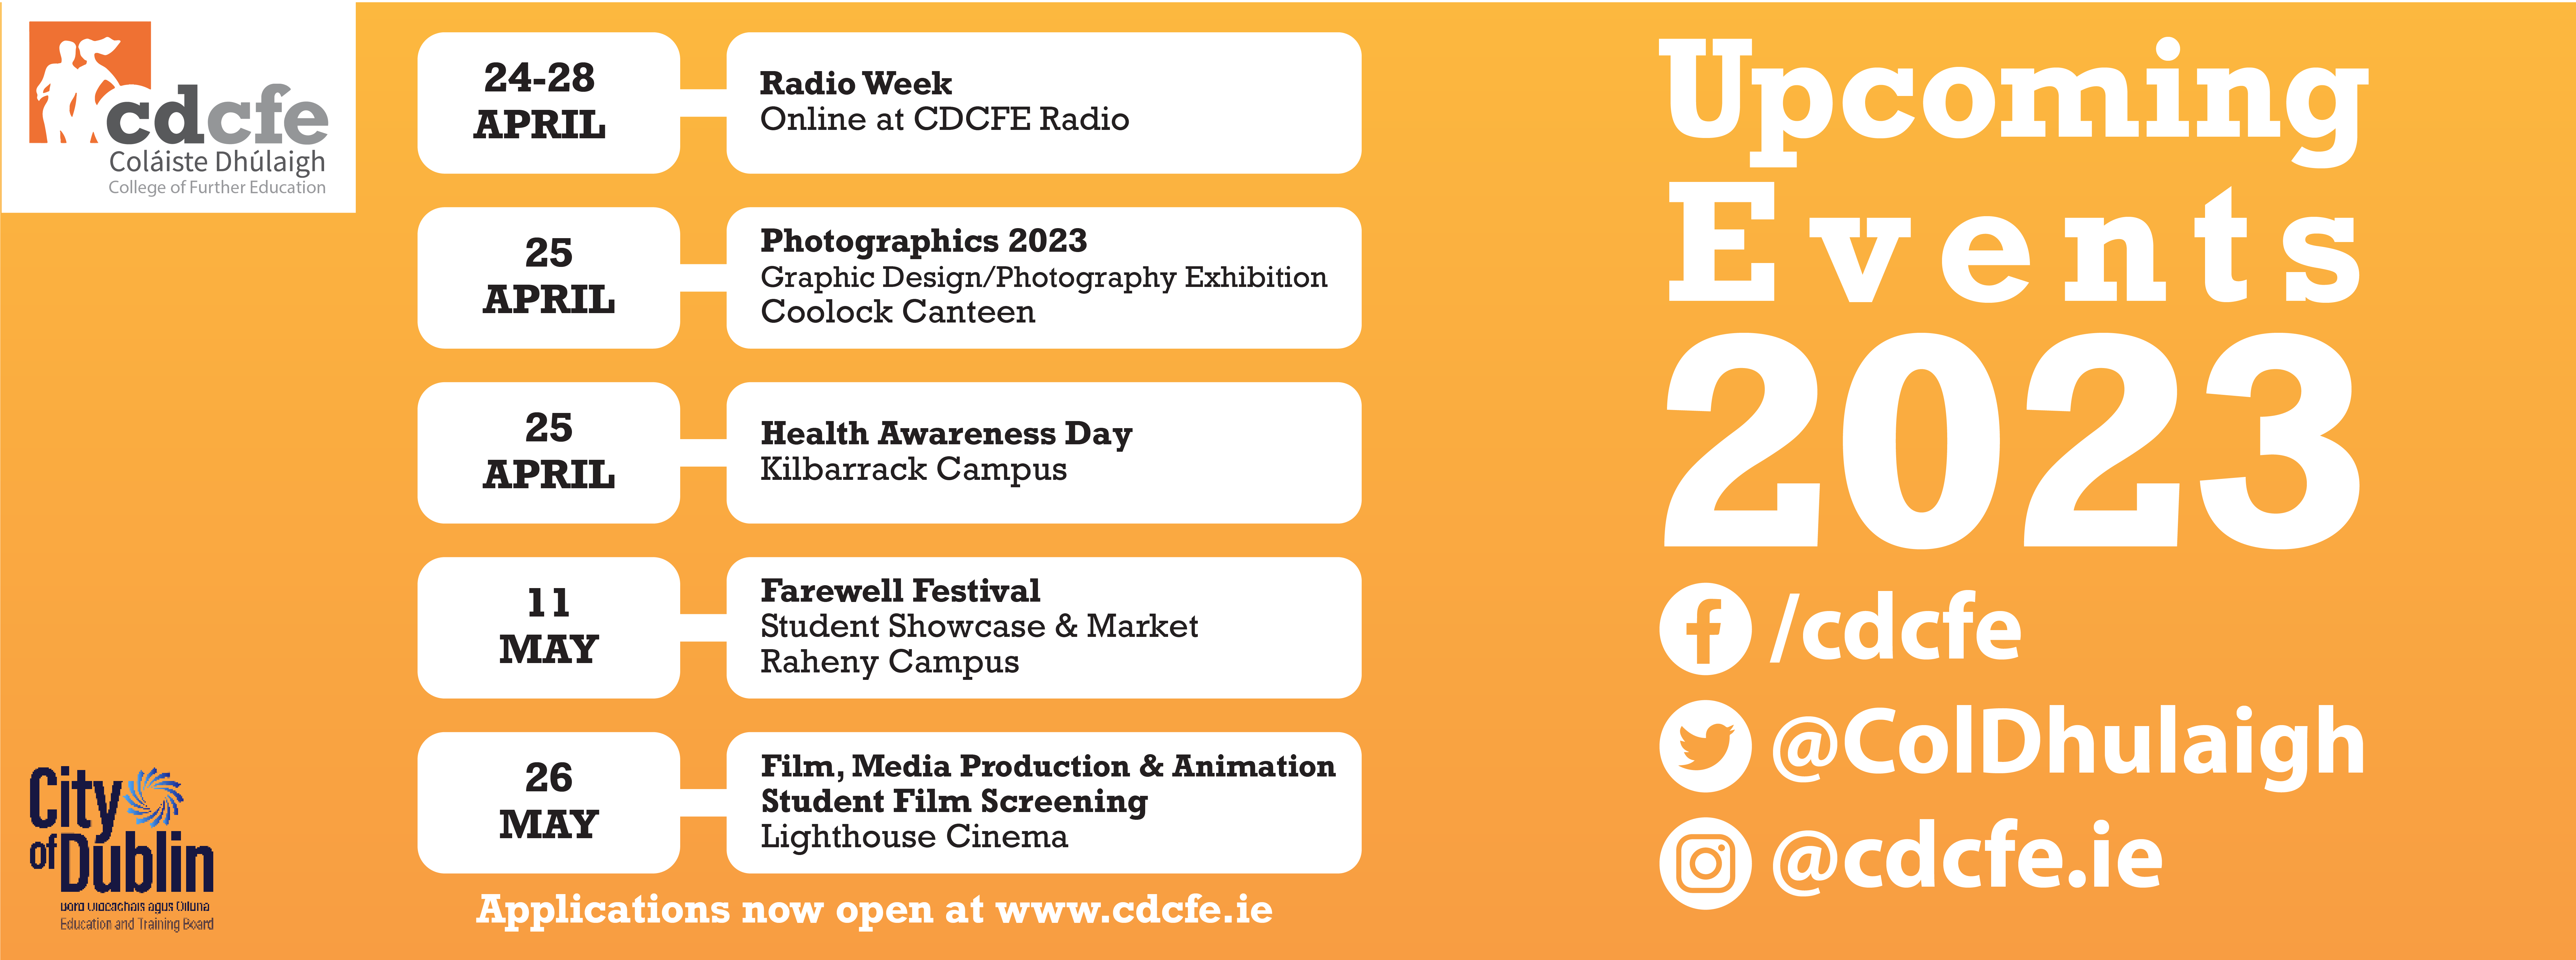 Upcoming events at CDCFE